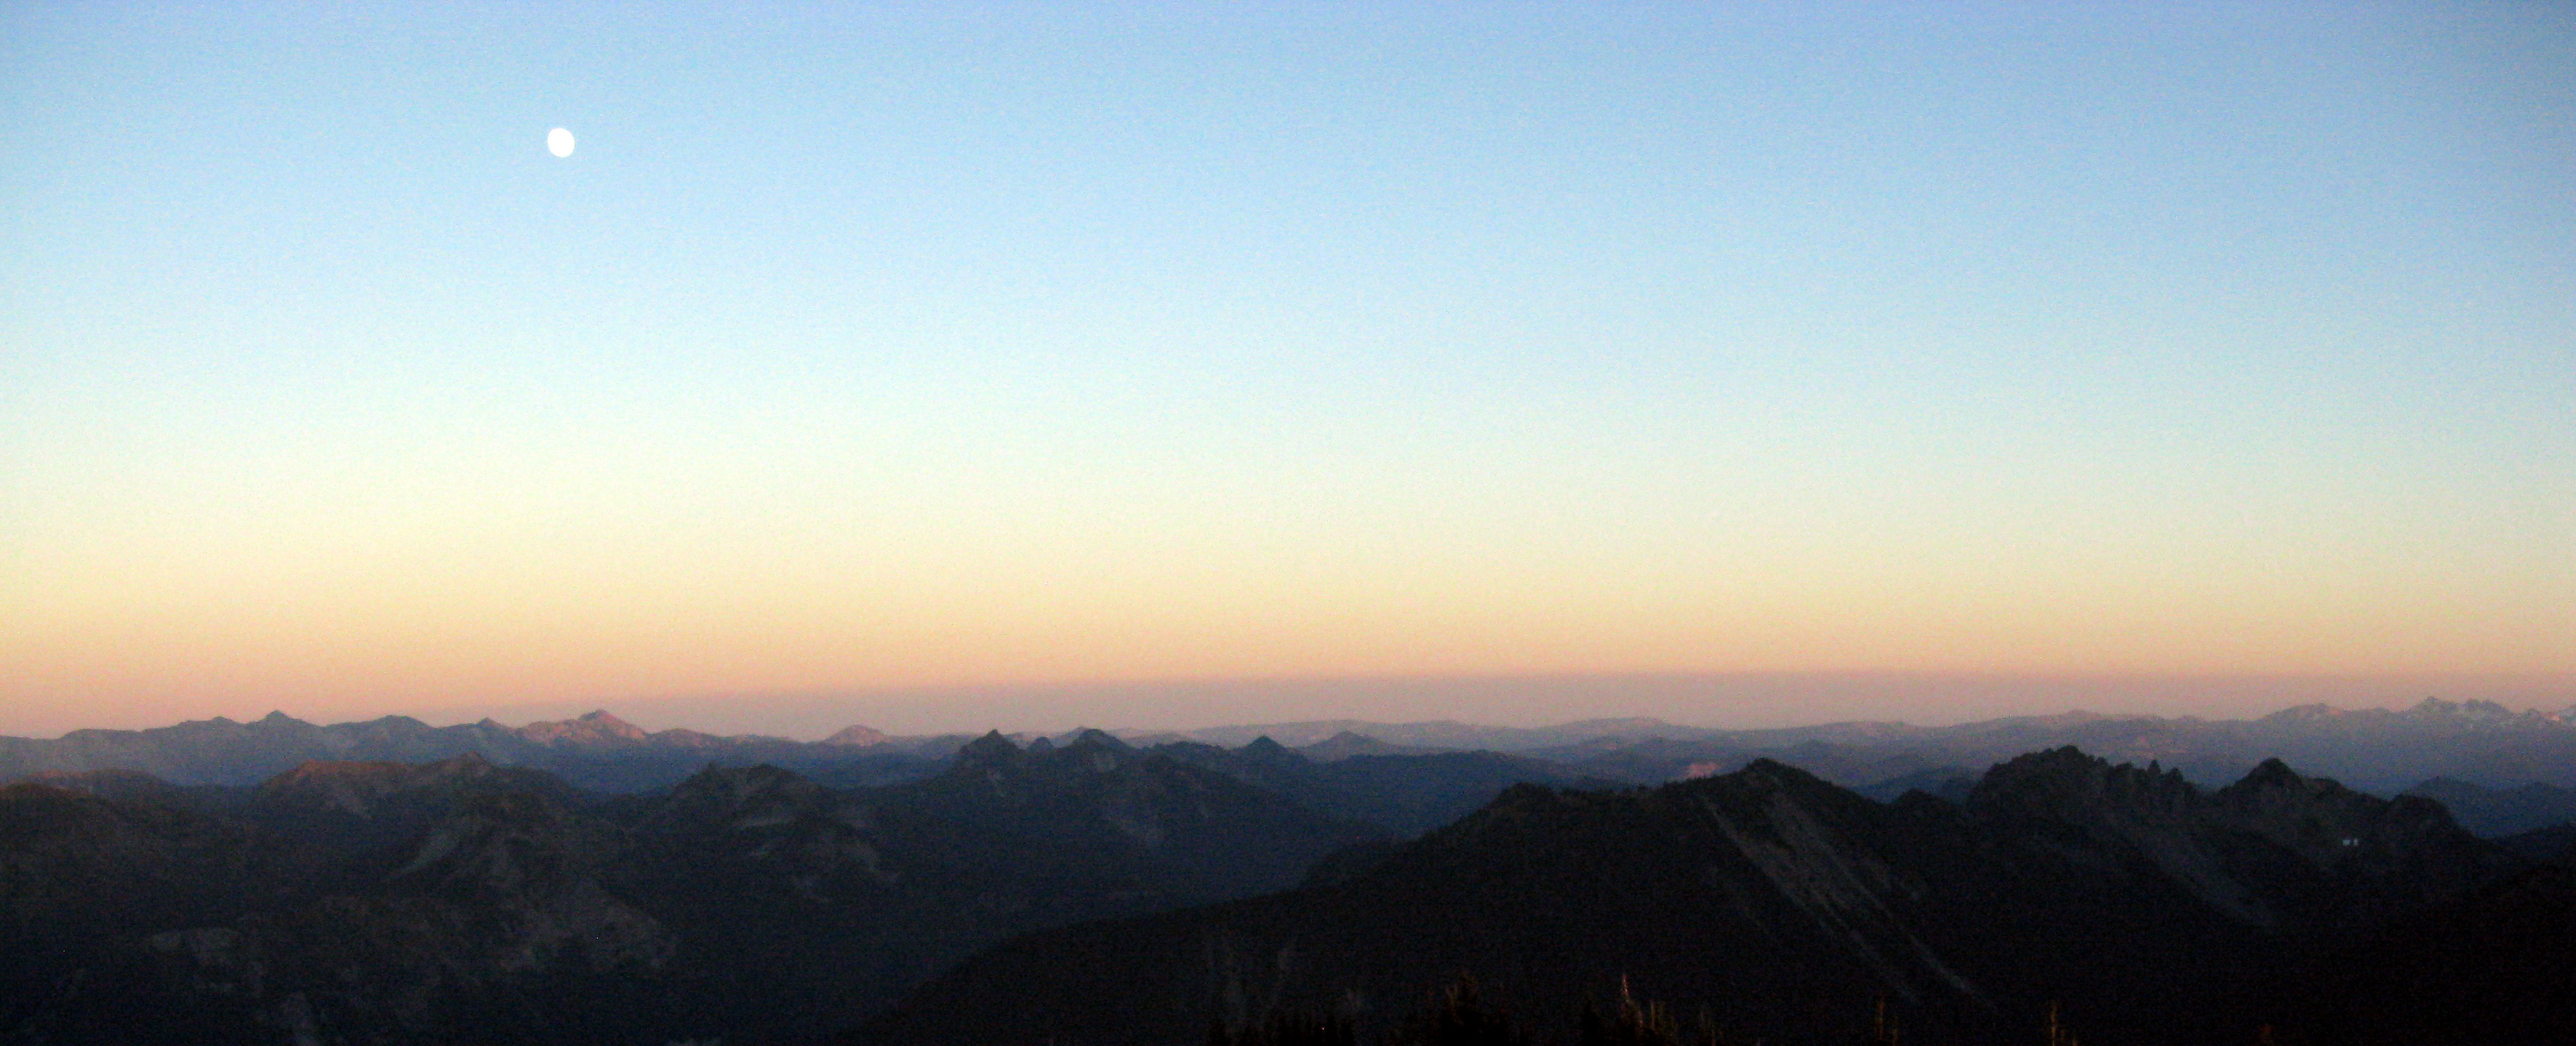 moon and mountain line from side of dege peak